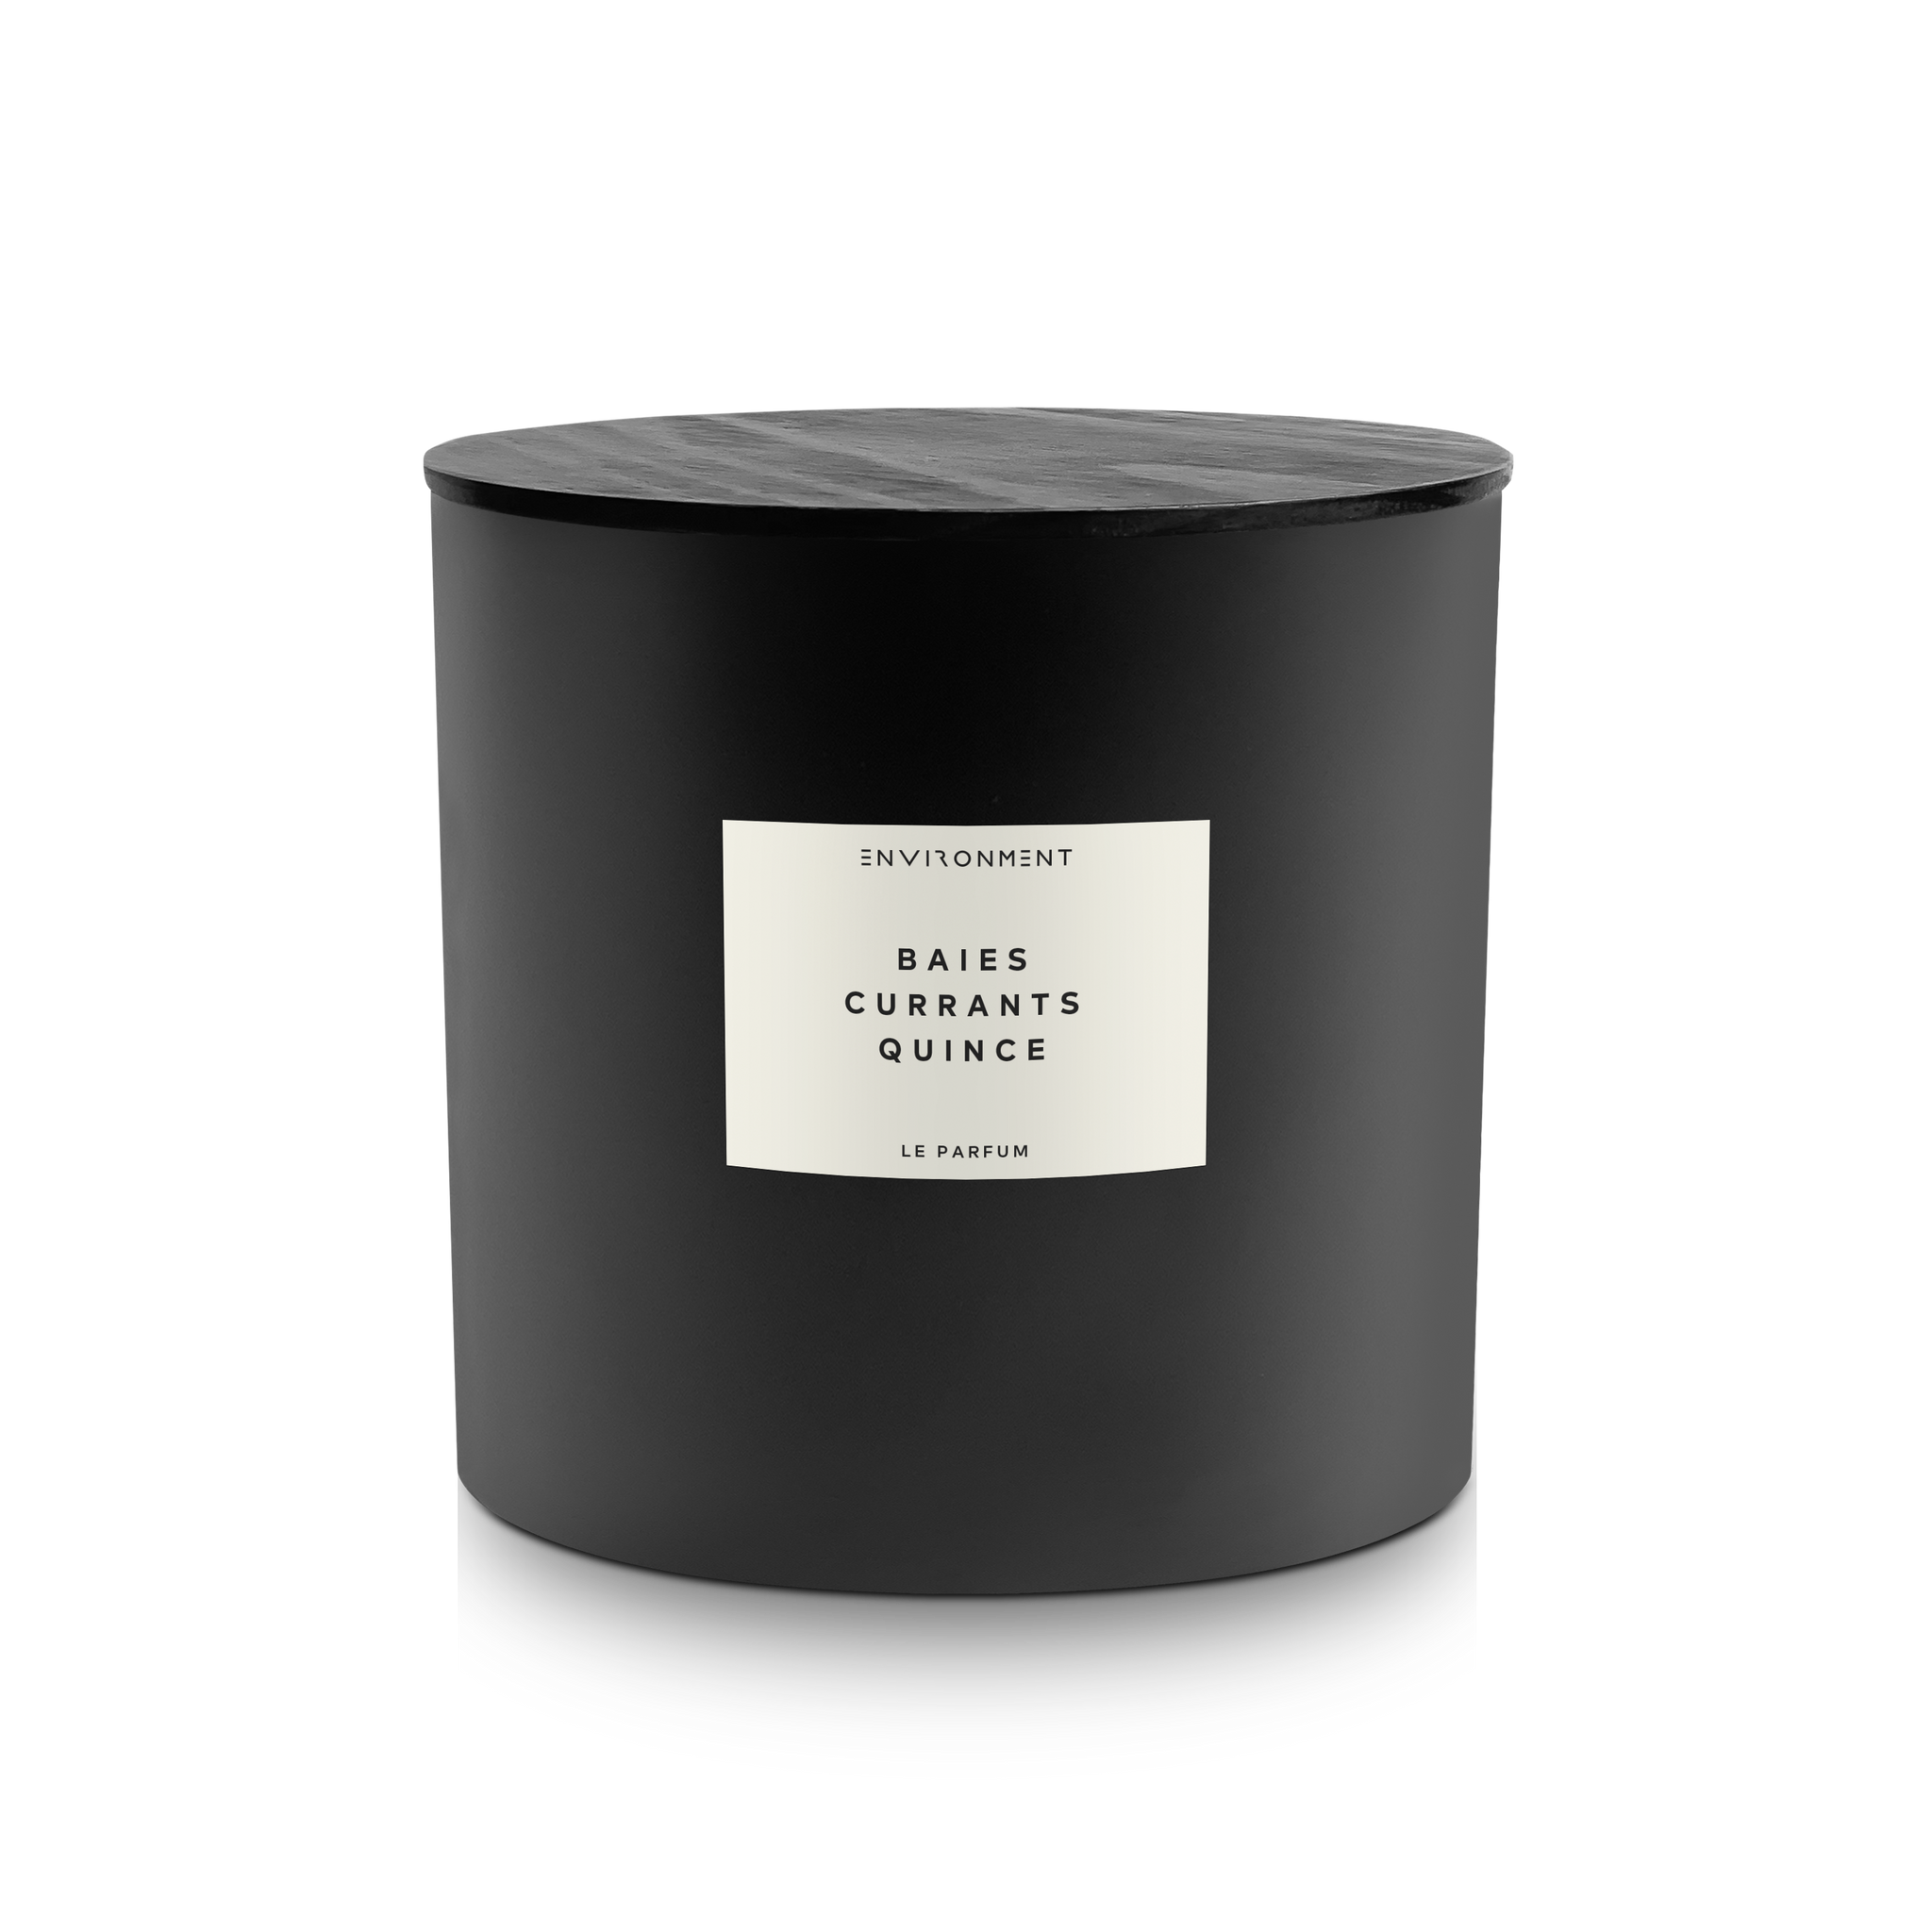 55oz Baies | Currants | Quince Candle (Inspired by Diptyque Baies®)